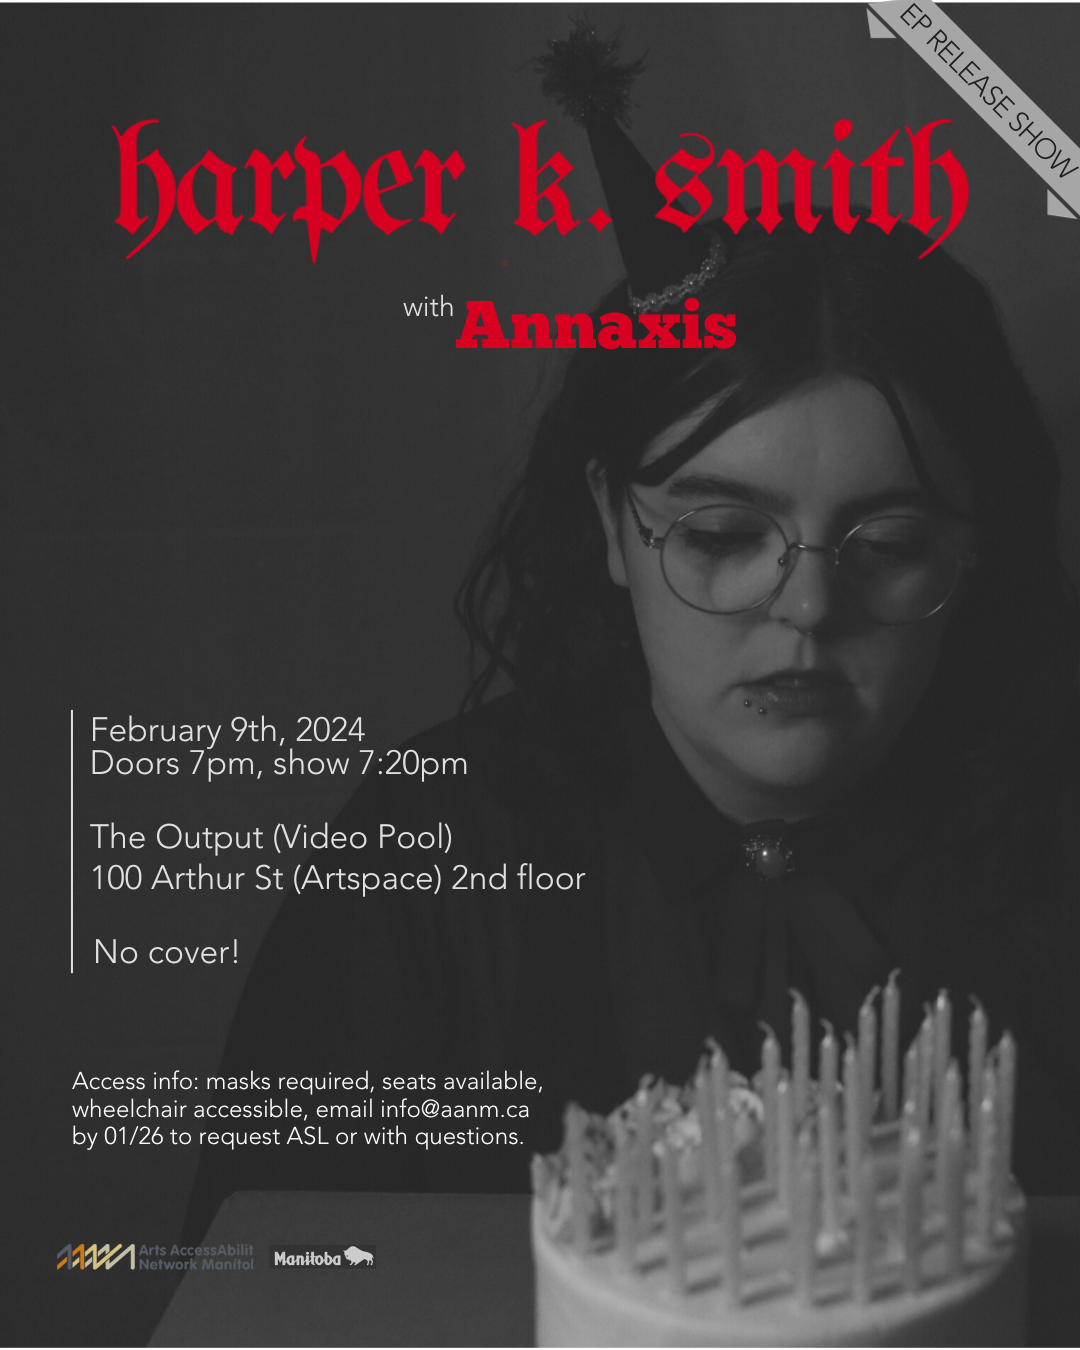 EP release show poster. The main image is a black and white photo of a young light-skinned woman with shoulder-length dark hair parted in the centre, large round glasses, and two small piercings near her bottom lip. She is seated before a birthday cake topped with unlit candles, wearing a party hat and her eyes are cast downwards to the cake with a depressed expression. Across the top of the image in red blackletter font reads “Harper K. Smith”, with the opening act Annaxis noted below in red blocky font. The show details appear in the bottom left corner in white sans serif font: February 9th, 2024, doors 7pm, show 7:20pm, The Output (Video Pool) 100 Arthur St (Artspace) 2nd floor, No cover! Access info: masks required, seats available, wheelchair accessible, email info@aanm.ca by 01/26 to request ASL or with questions. Below this text are Arts AccessAbility Network and Province of Manitoba logos.